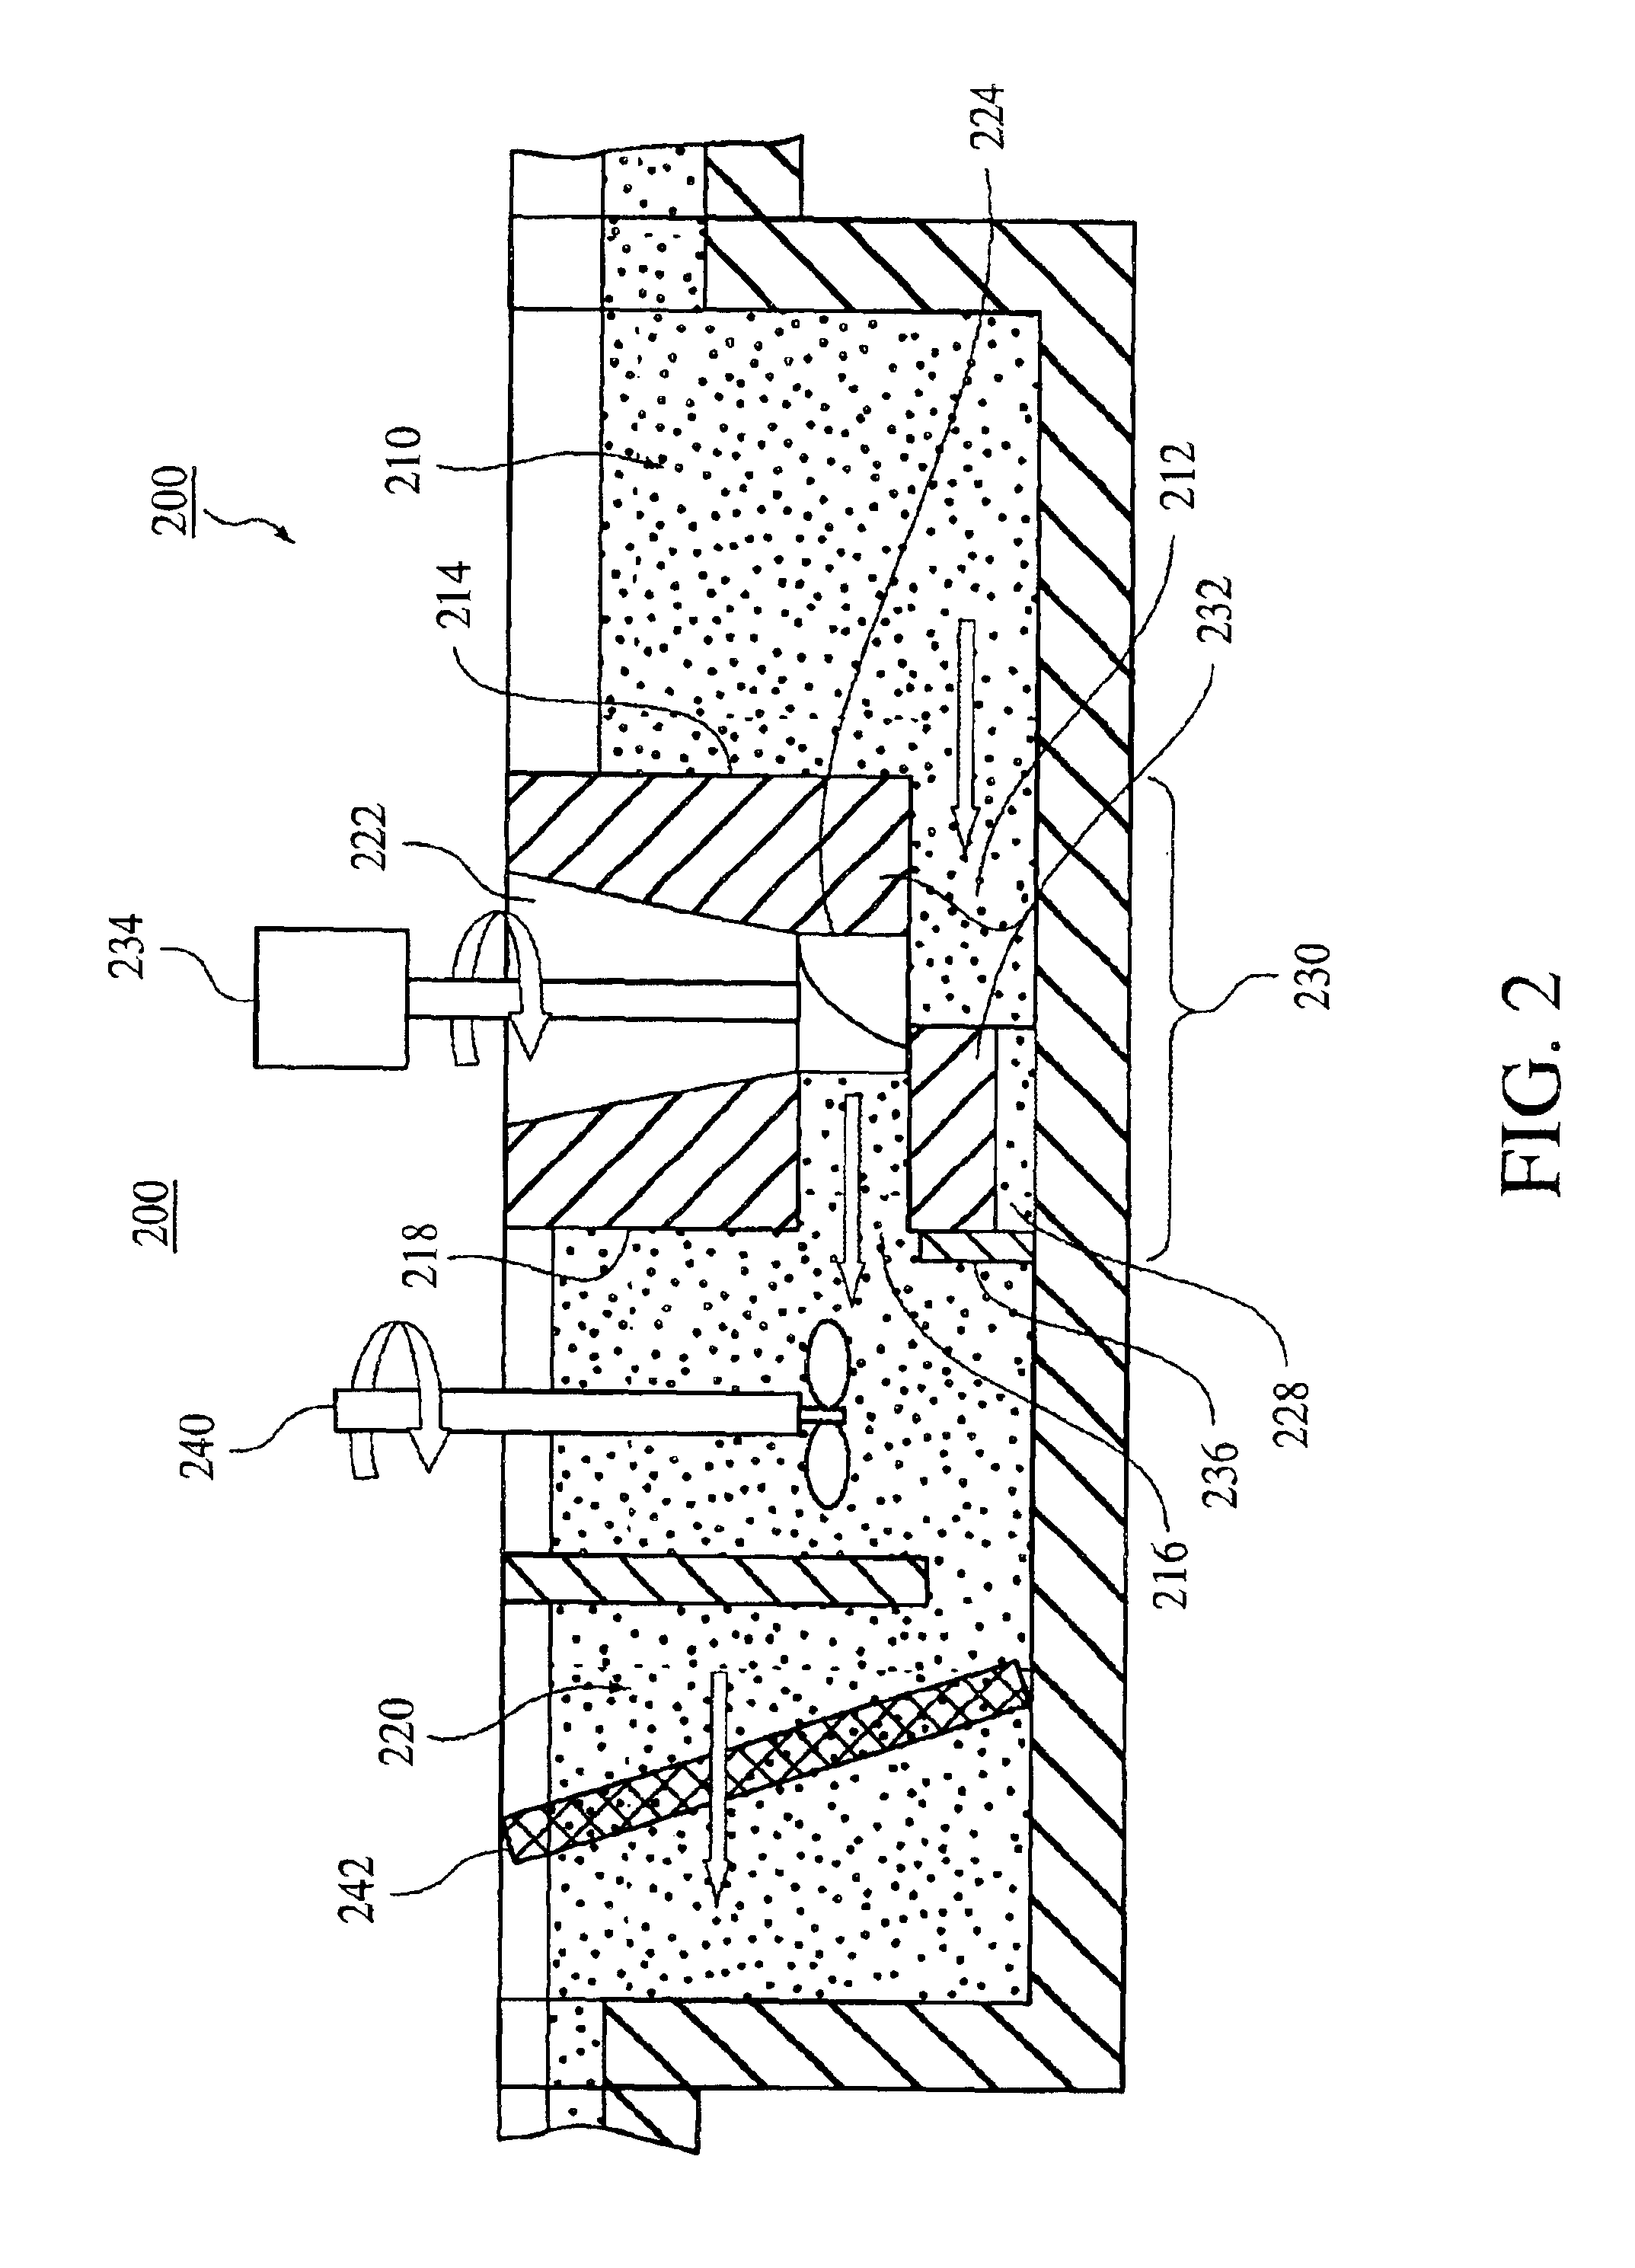 Overflow transfer furnace and control system for reduced oxide production in a casting furnace